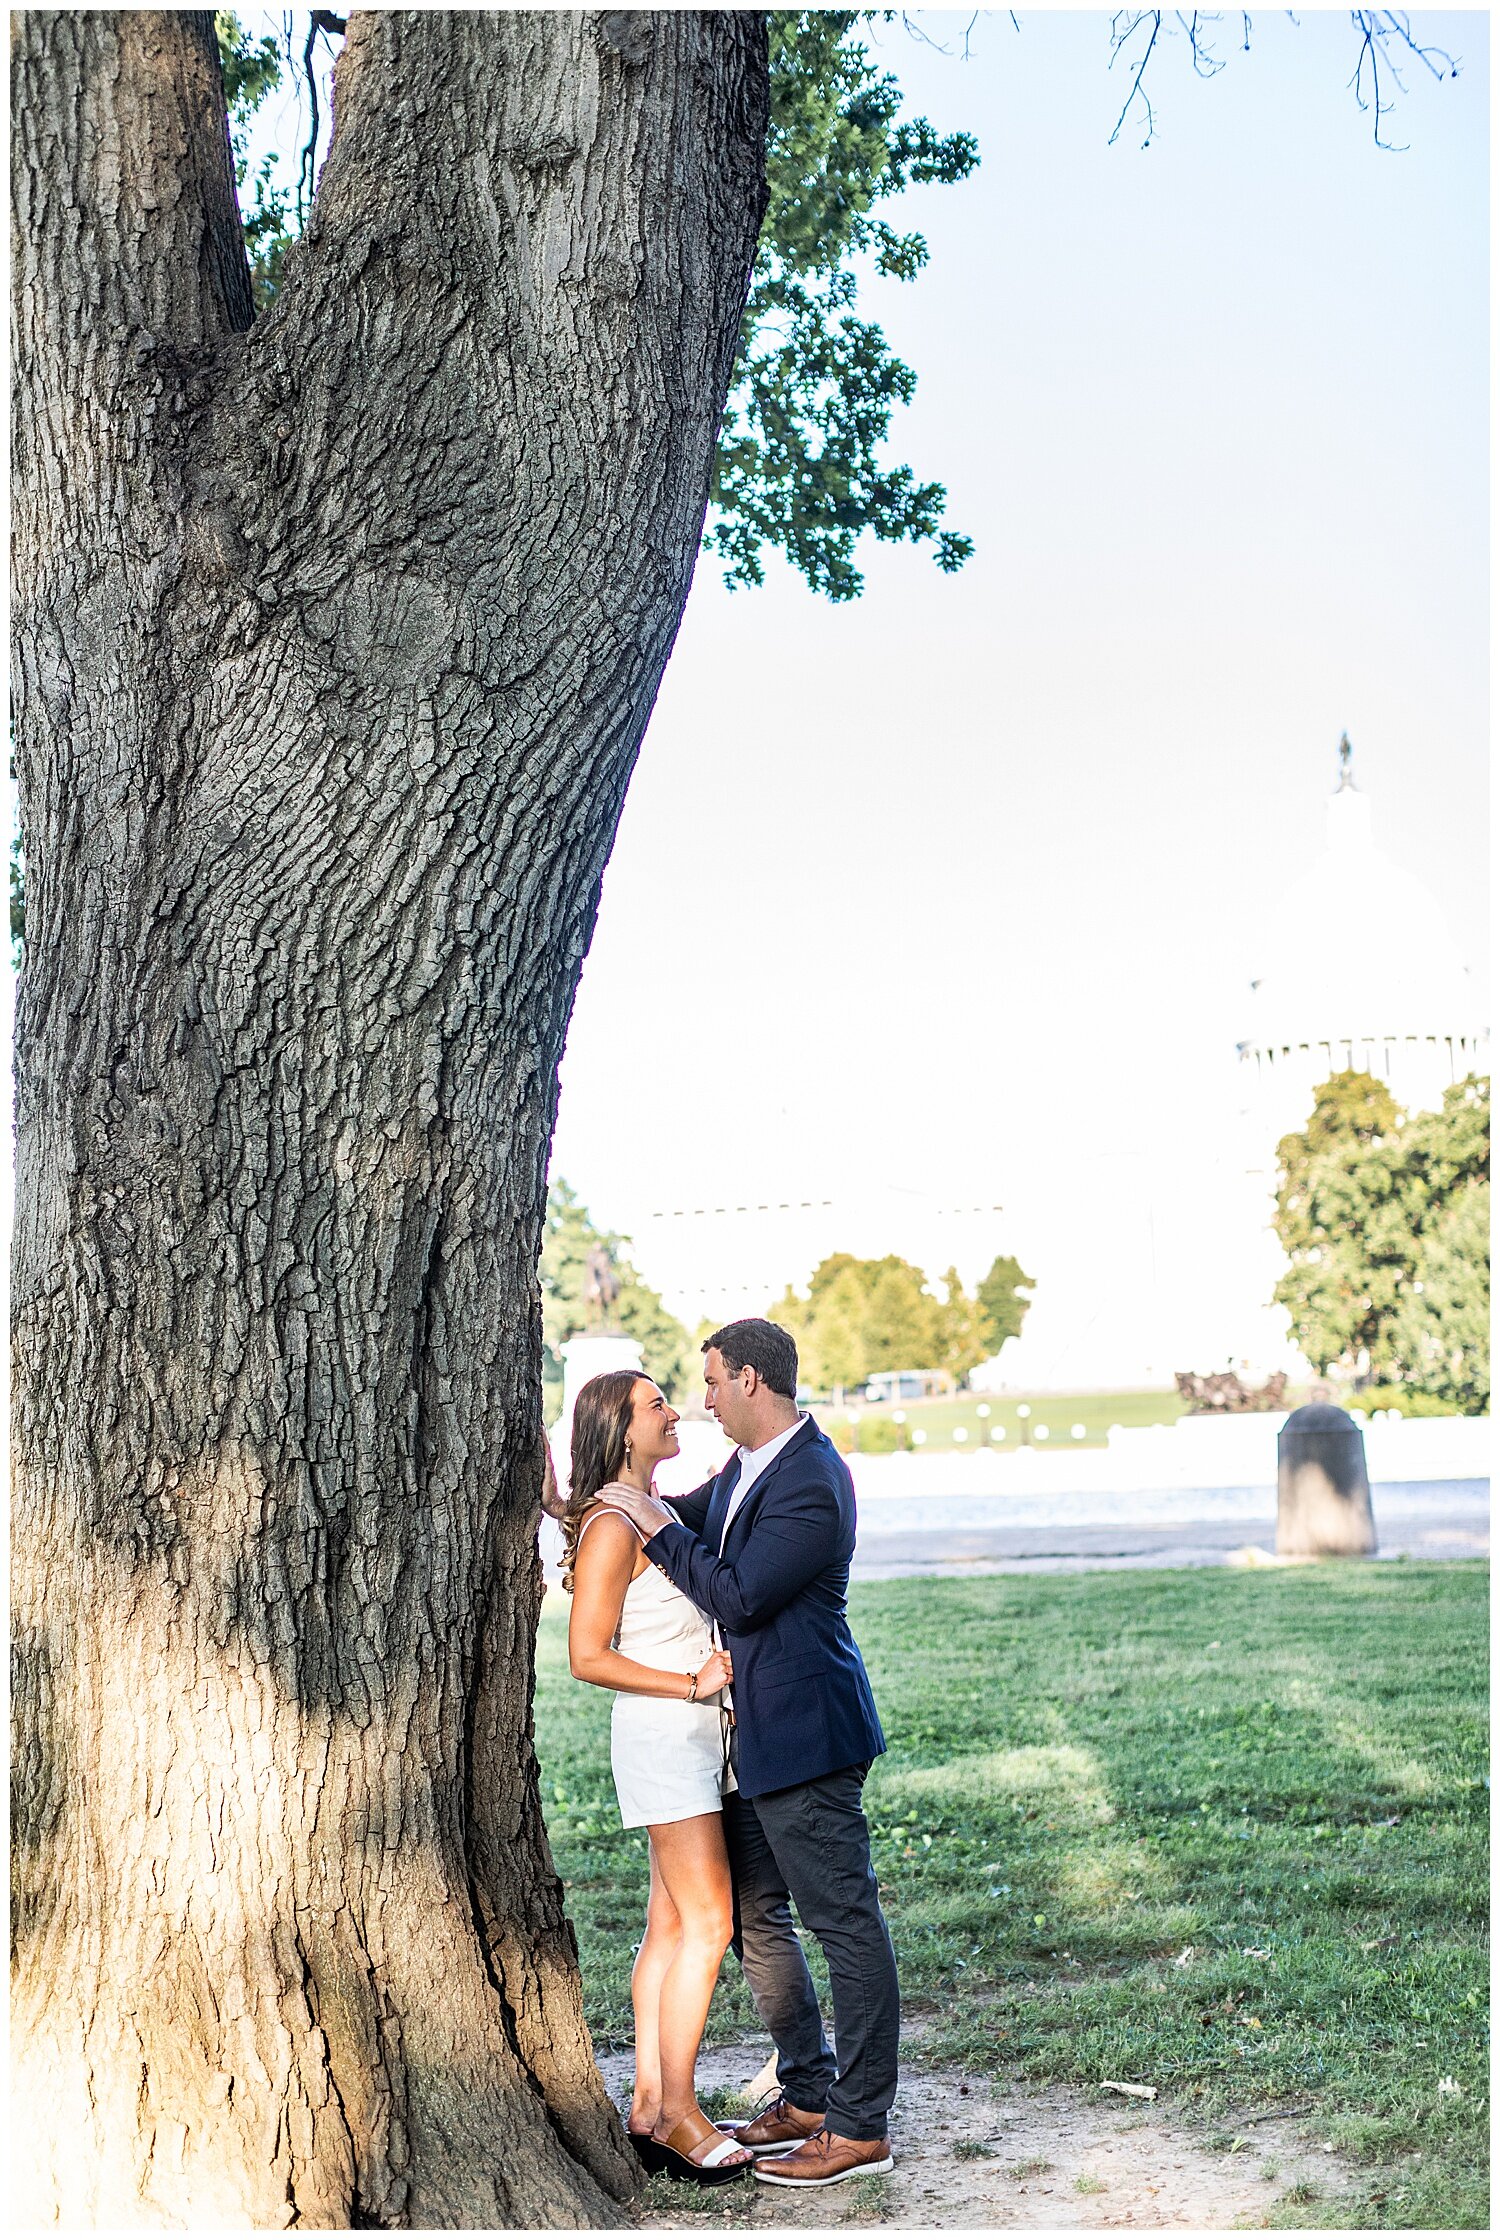 Haylie Chris National Mall Engagement Session 2020 Living Radiant Photography_0004.jpg